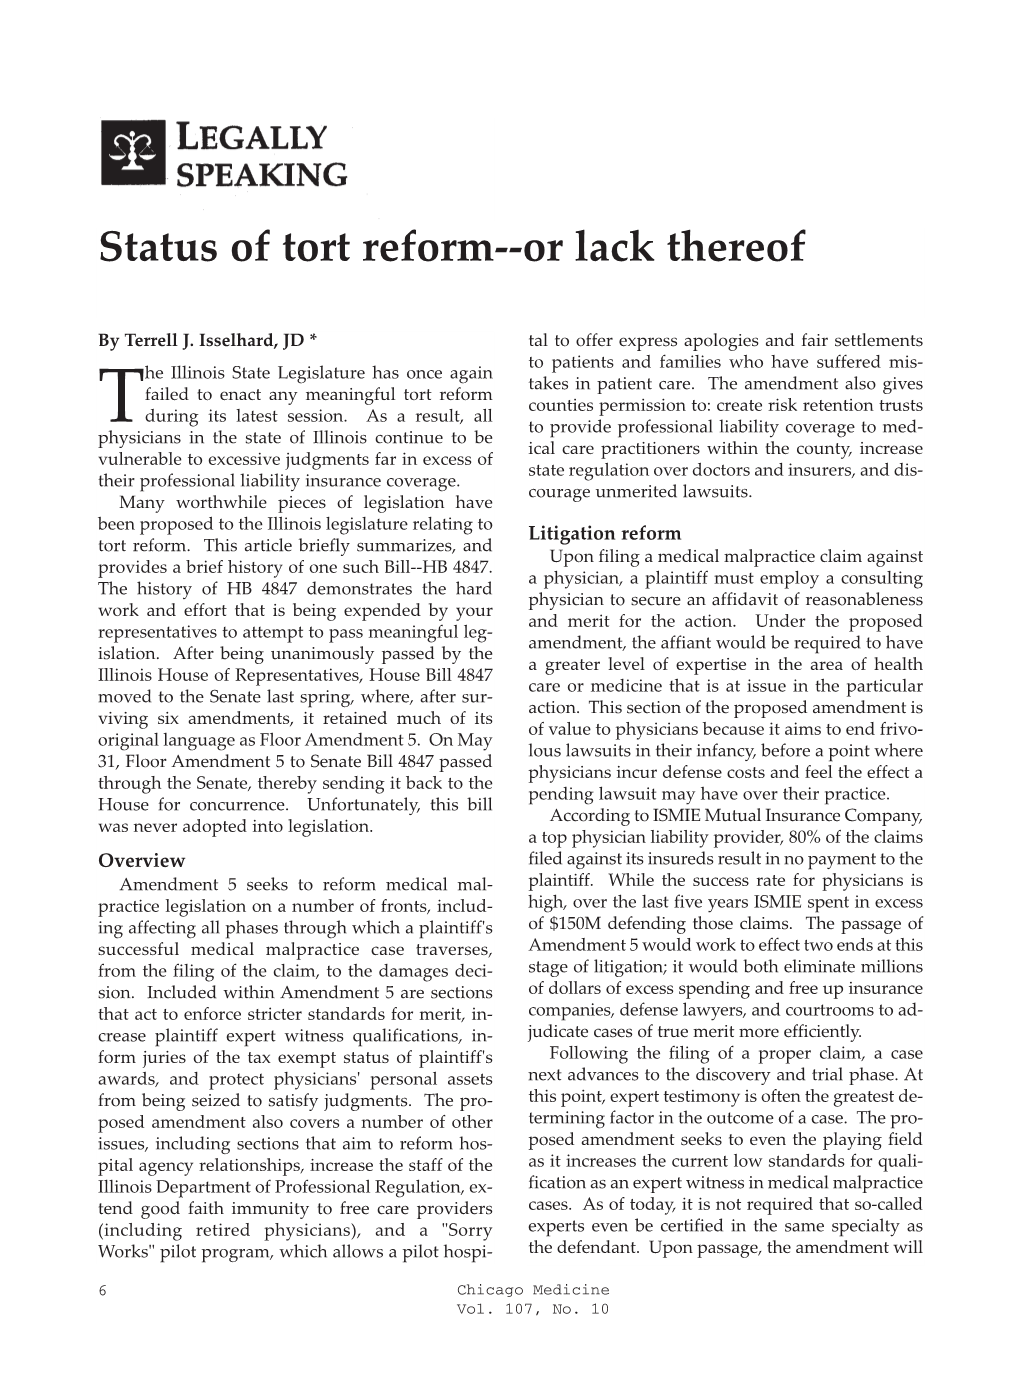 Status of Tort Reform--Or Lack Thereof